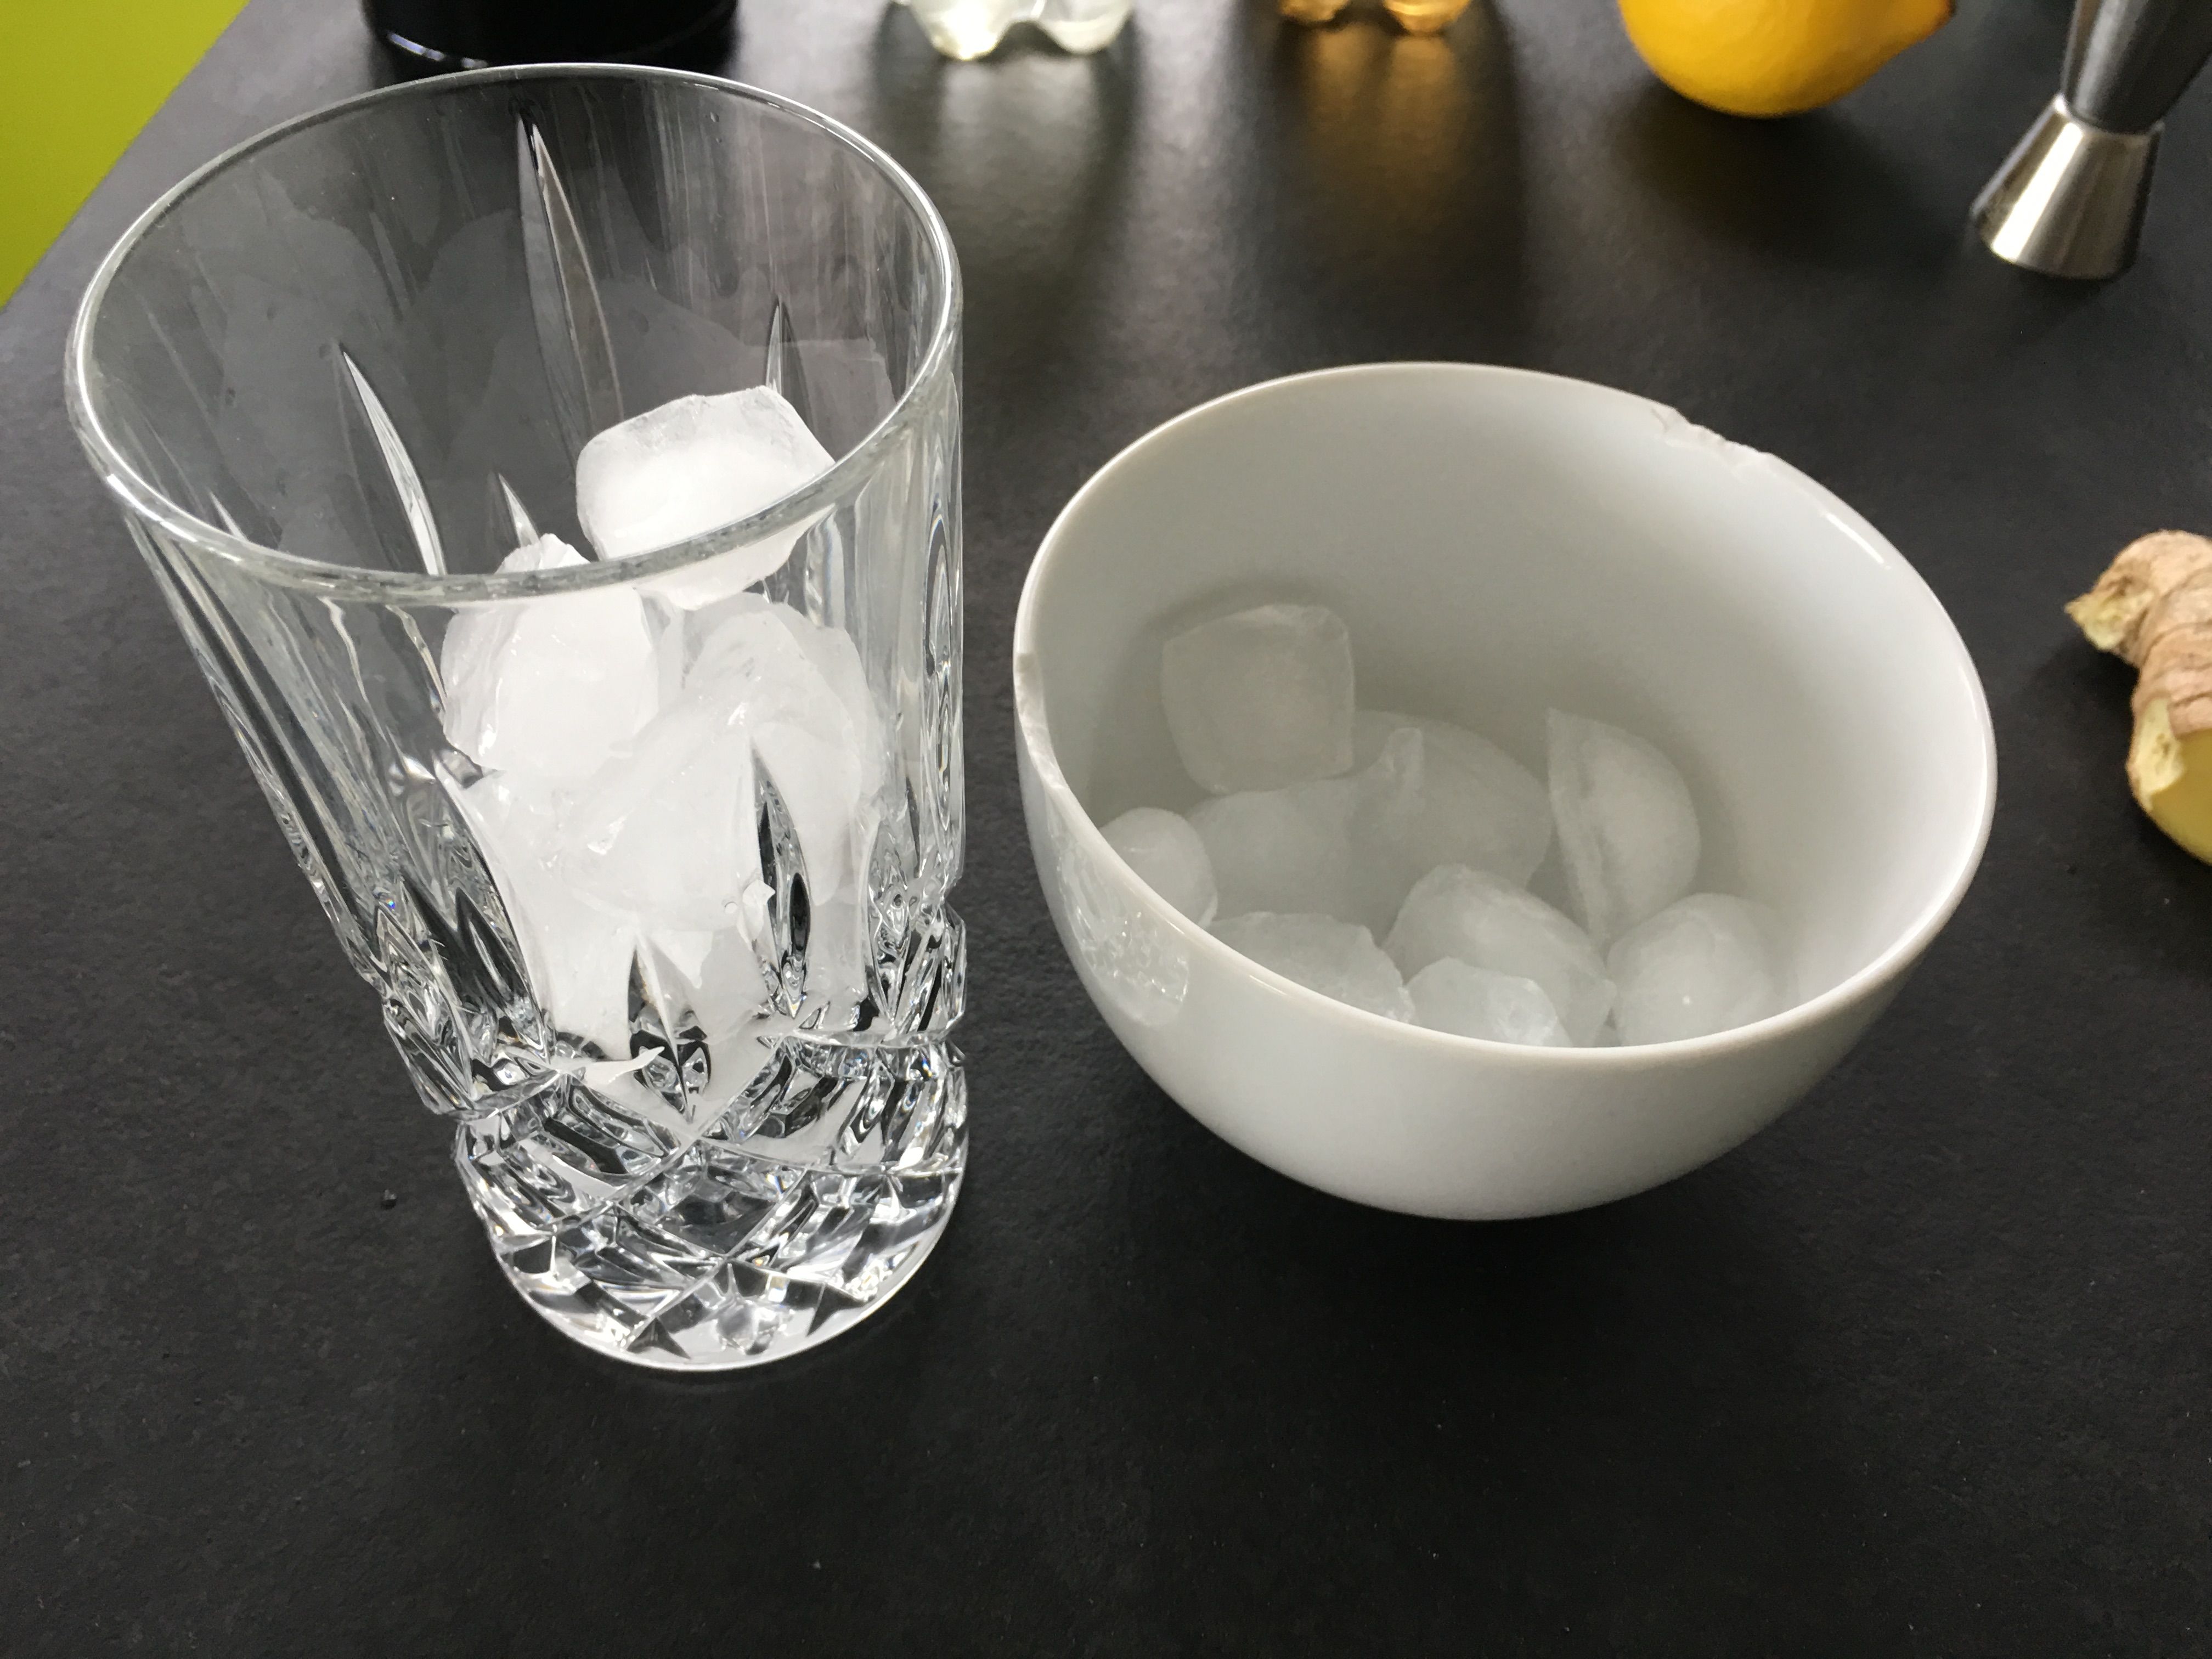 Gin Tonic on Steemit - A How To by Detlev (13).JPG